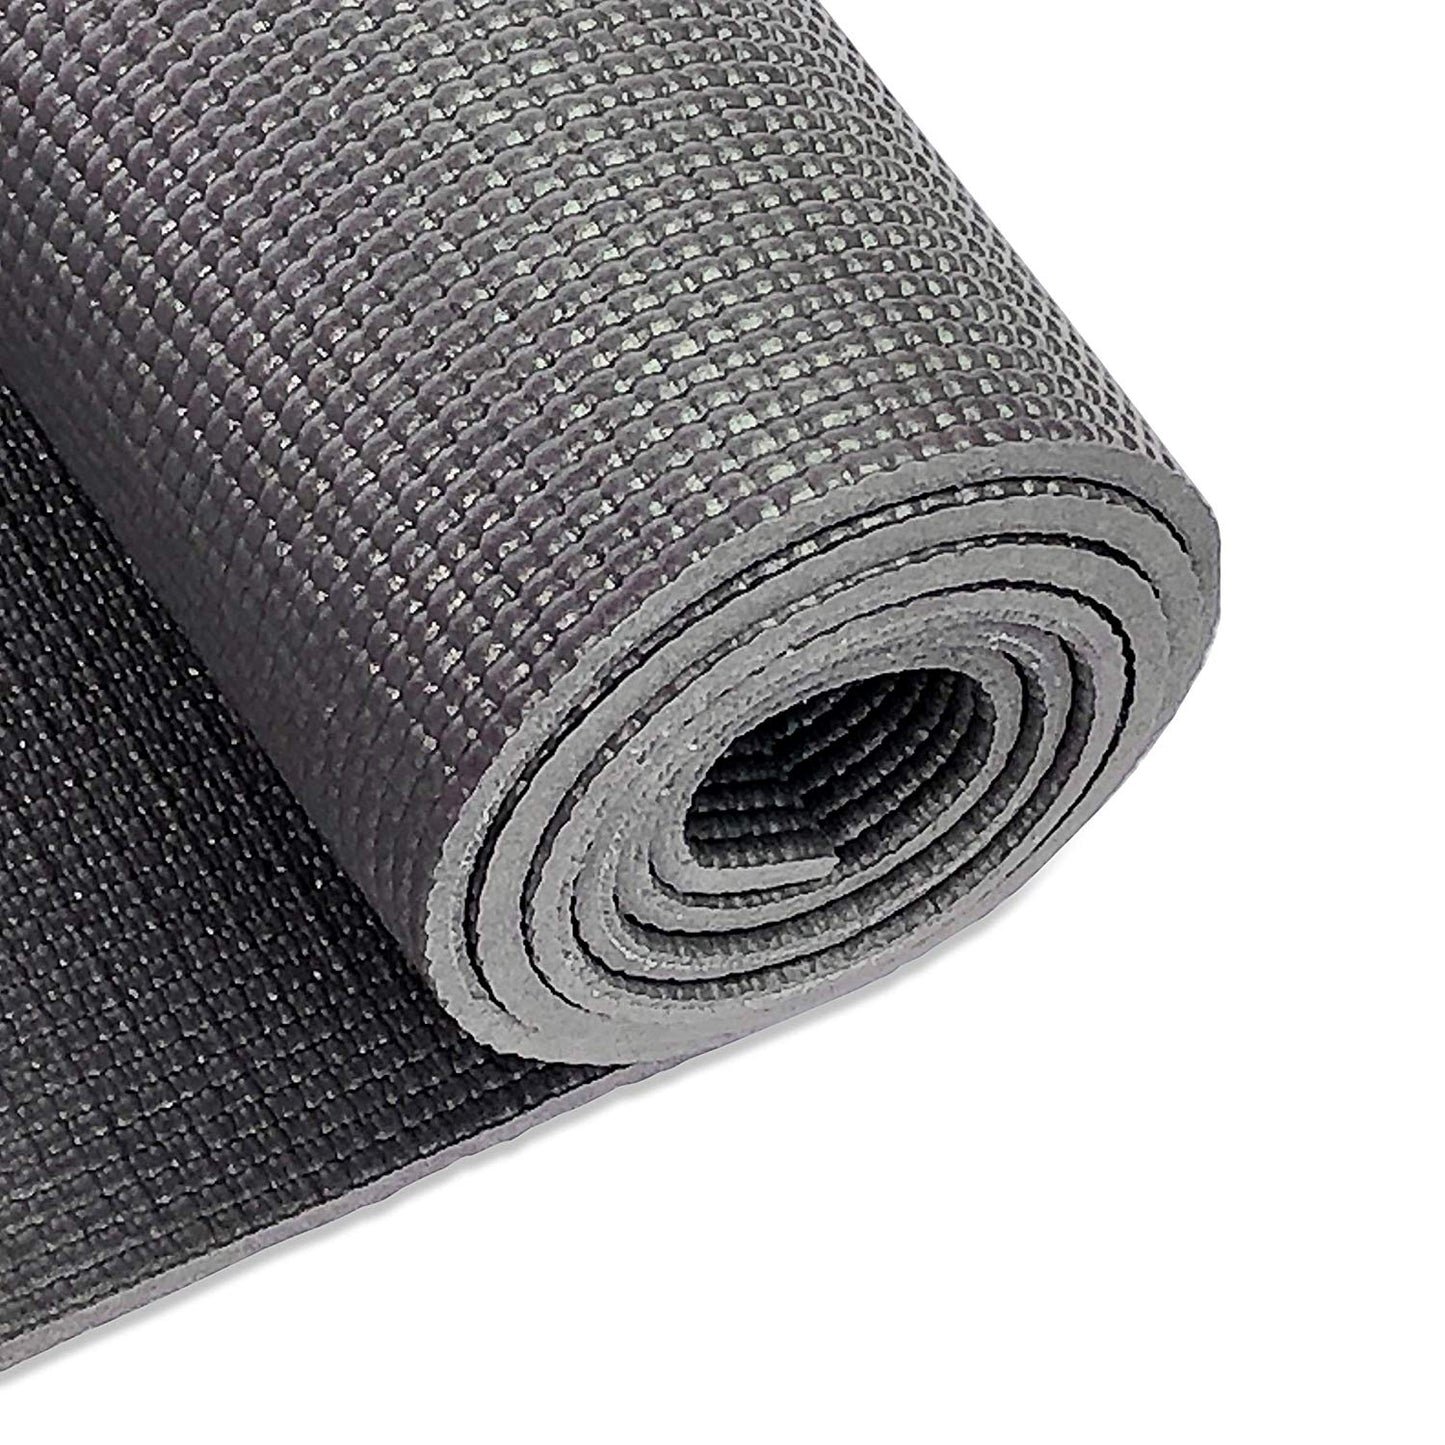 Yoga Mat - Eco-Friendly & Toxin Free - 72 x 26 inches - Gains Everyday